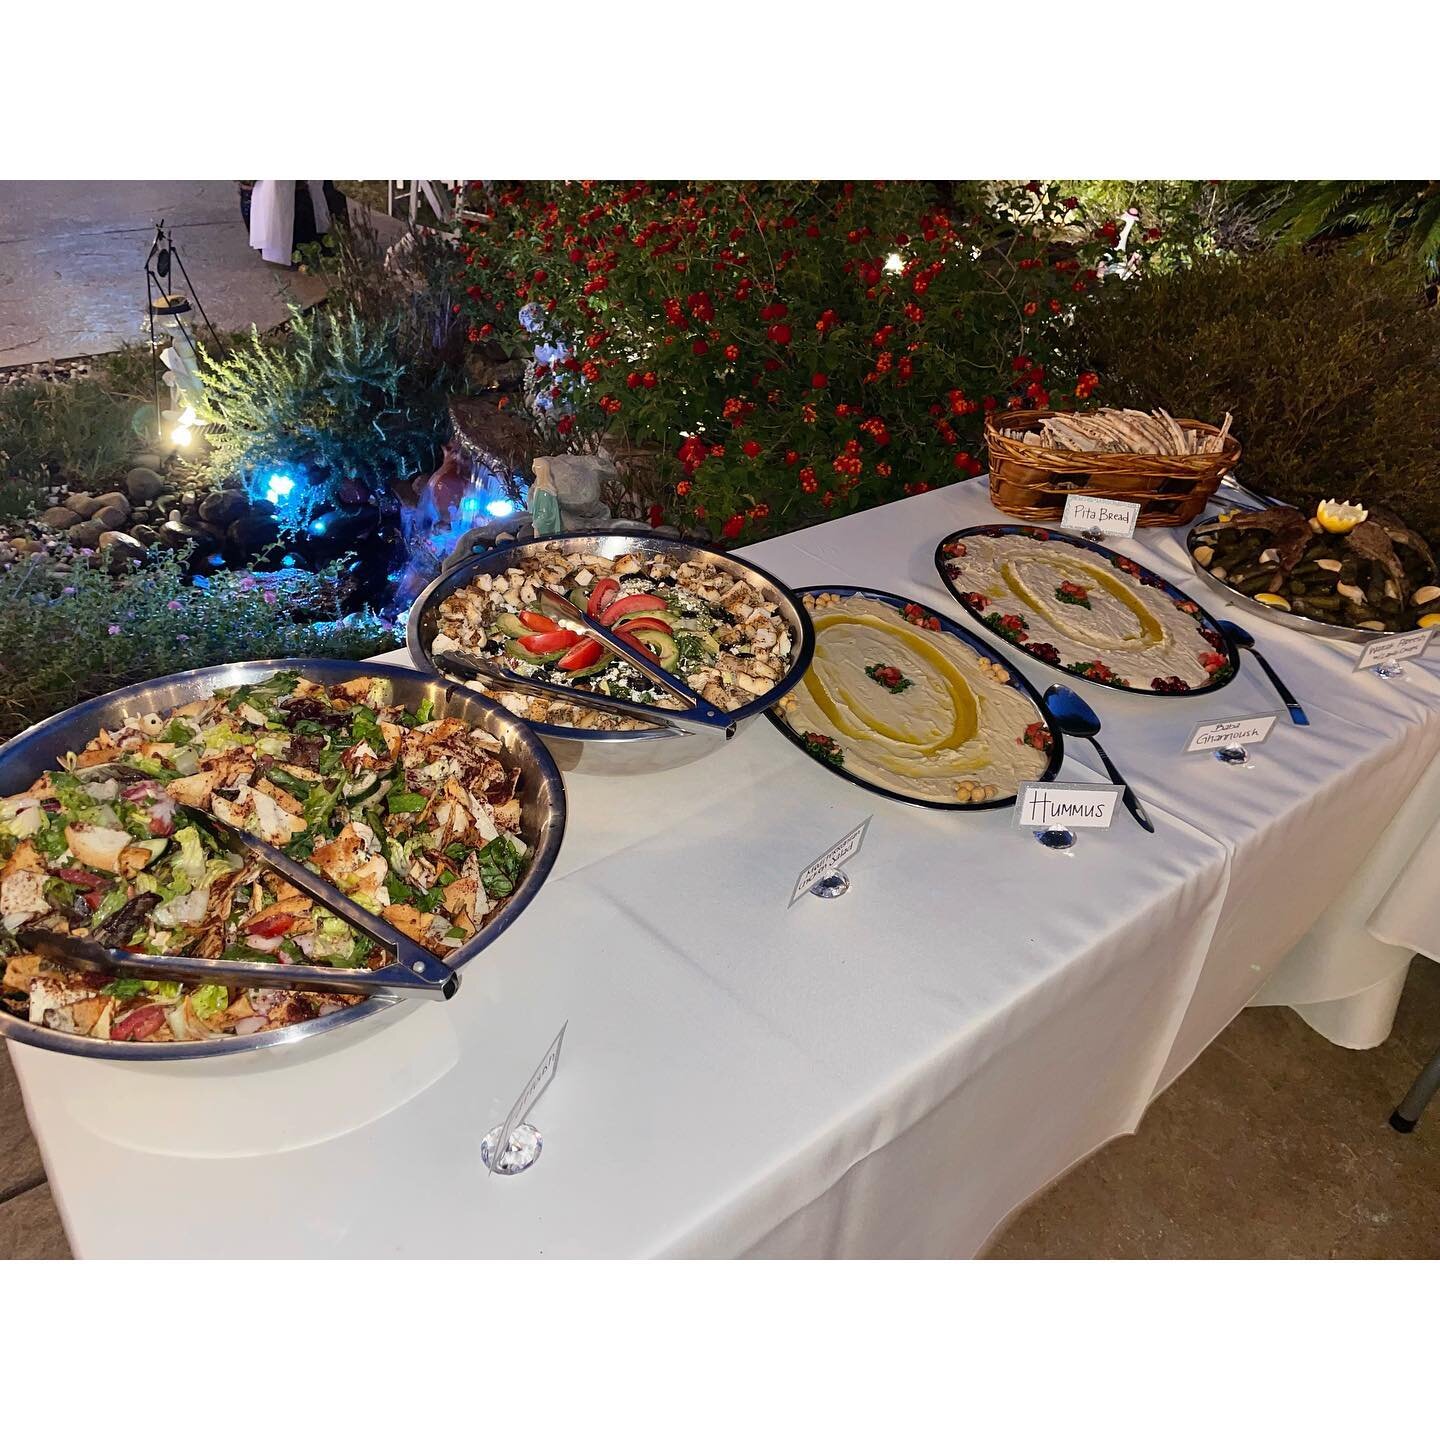 We can&rsquo;t forget about the FOOD! Our delicious menu from Michael &amp; Tonietta&rsquo;s Engagement Party! 💍 YUM!! 😋 

Email us at eventyservices@gmail.com for your next gathering or party! We&rsquo;re ready for you! 

Fattoush
Mediterranean Ch